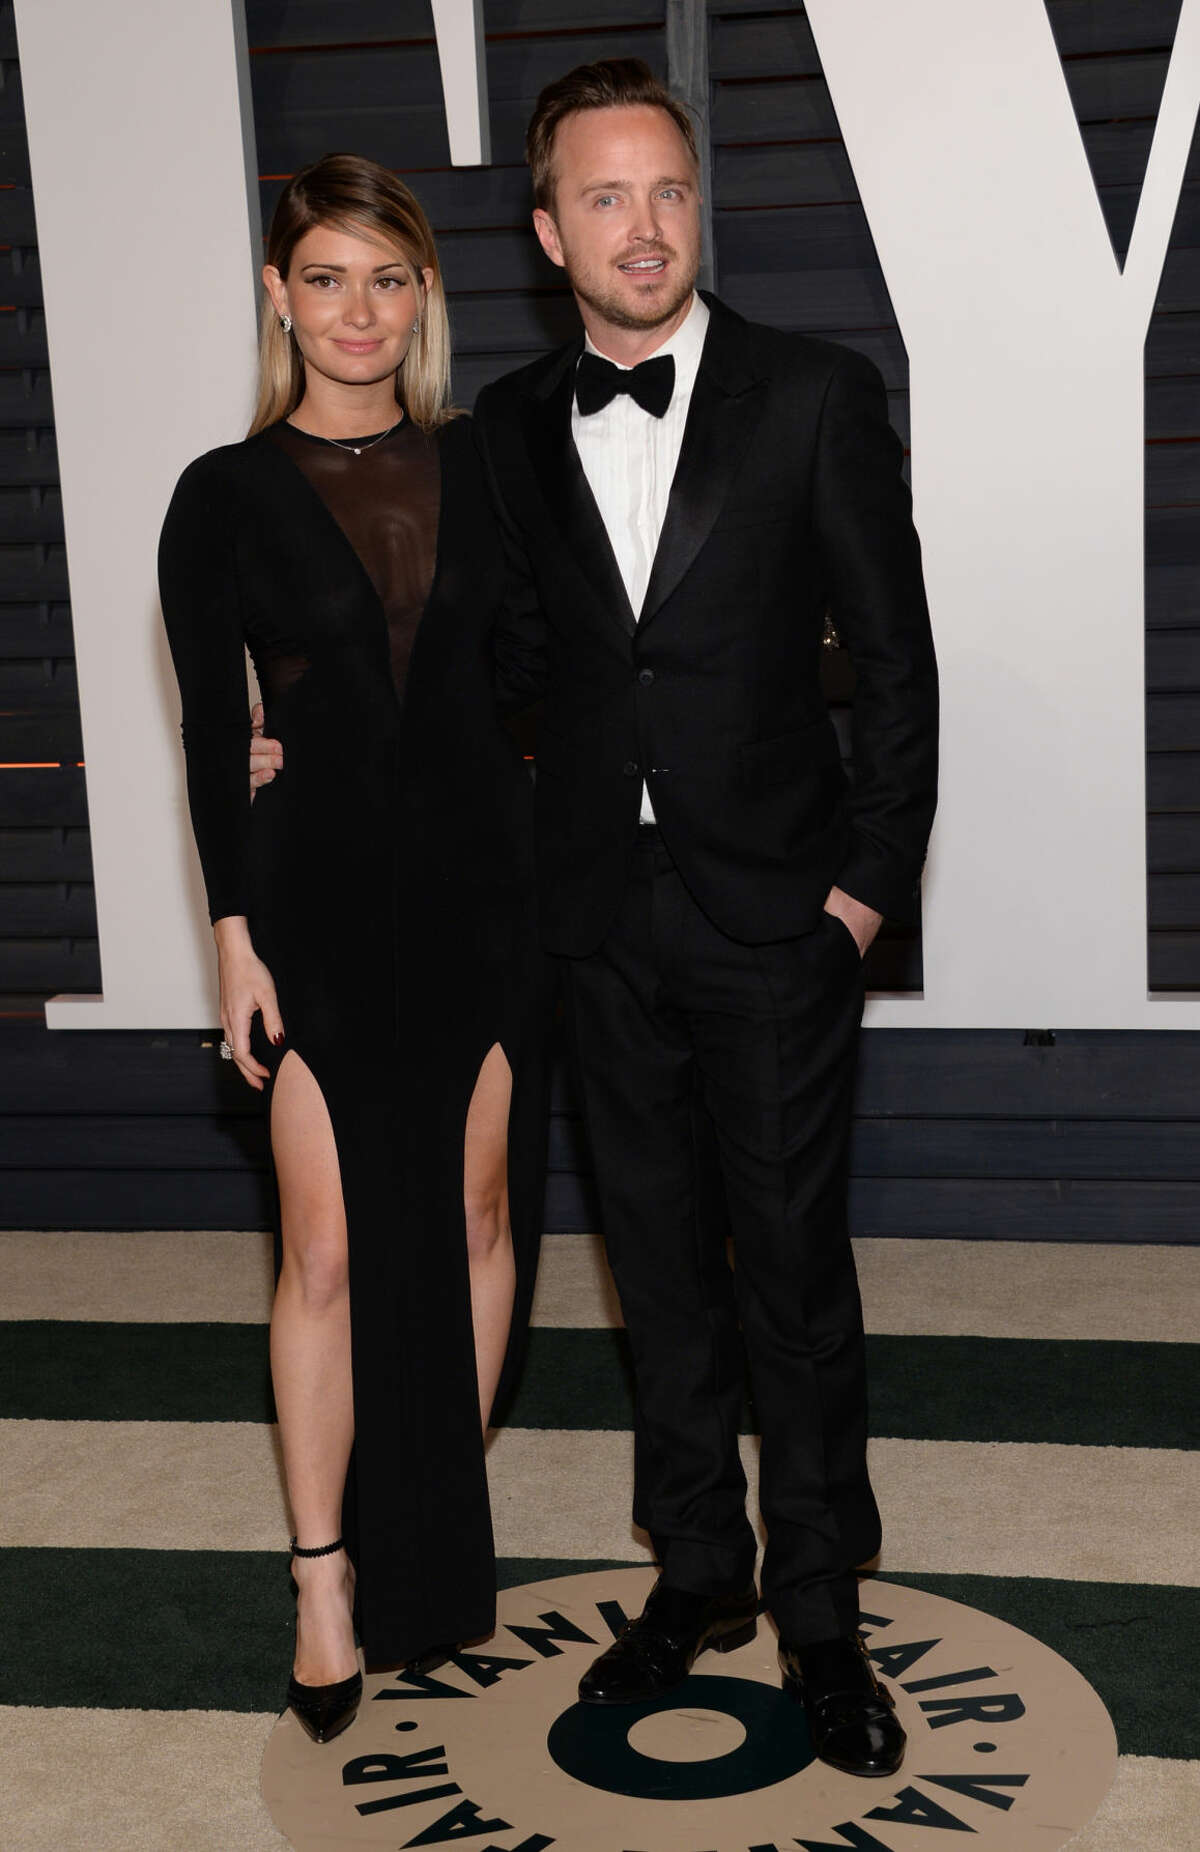 Lauren Parsekian, left, and Aaron Paul arrive at the 2015 Vanity Fair Oscar Party on Sunday, Feb. 22, 2015, in Beverly Hills, Calif. (Photo by Evan Agostini/Invision/AP)